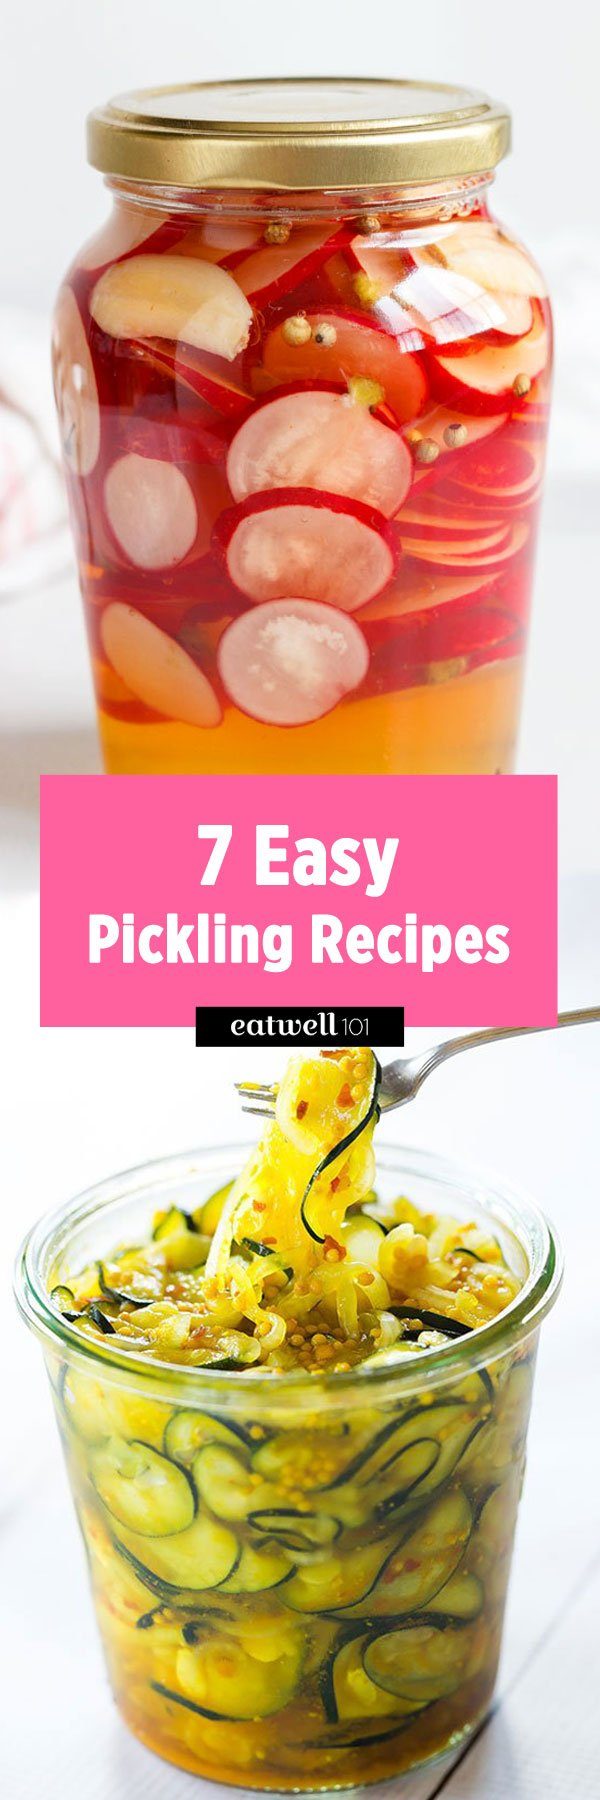 7 Easy Pickling Recipes - #pickling #recipes #eatwell101 - Try these easy pickling recipes and make your own pickled vegetables with seasonal veggies!